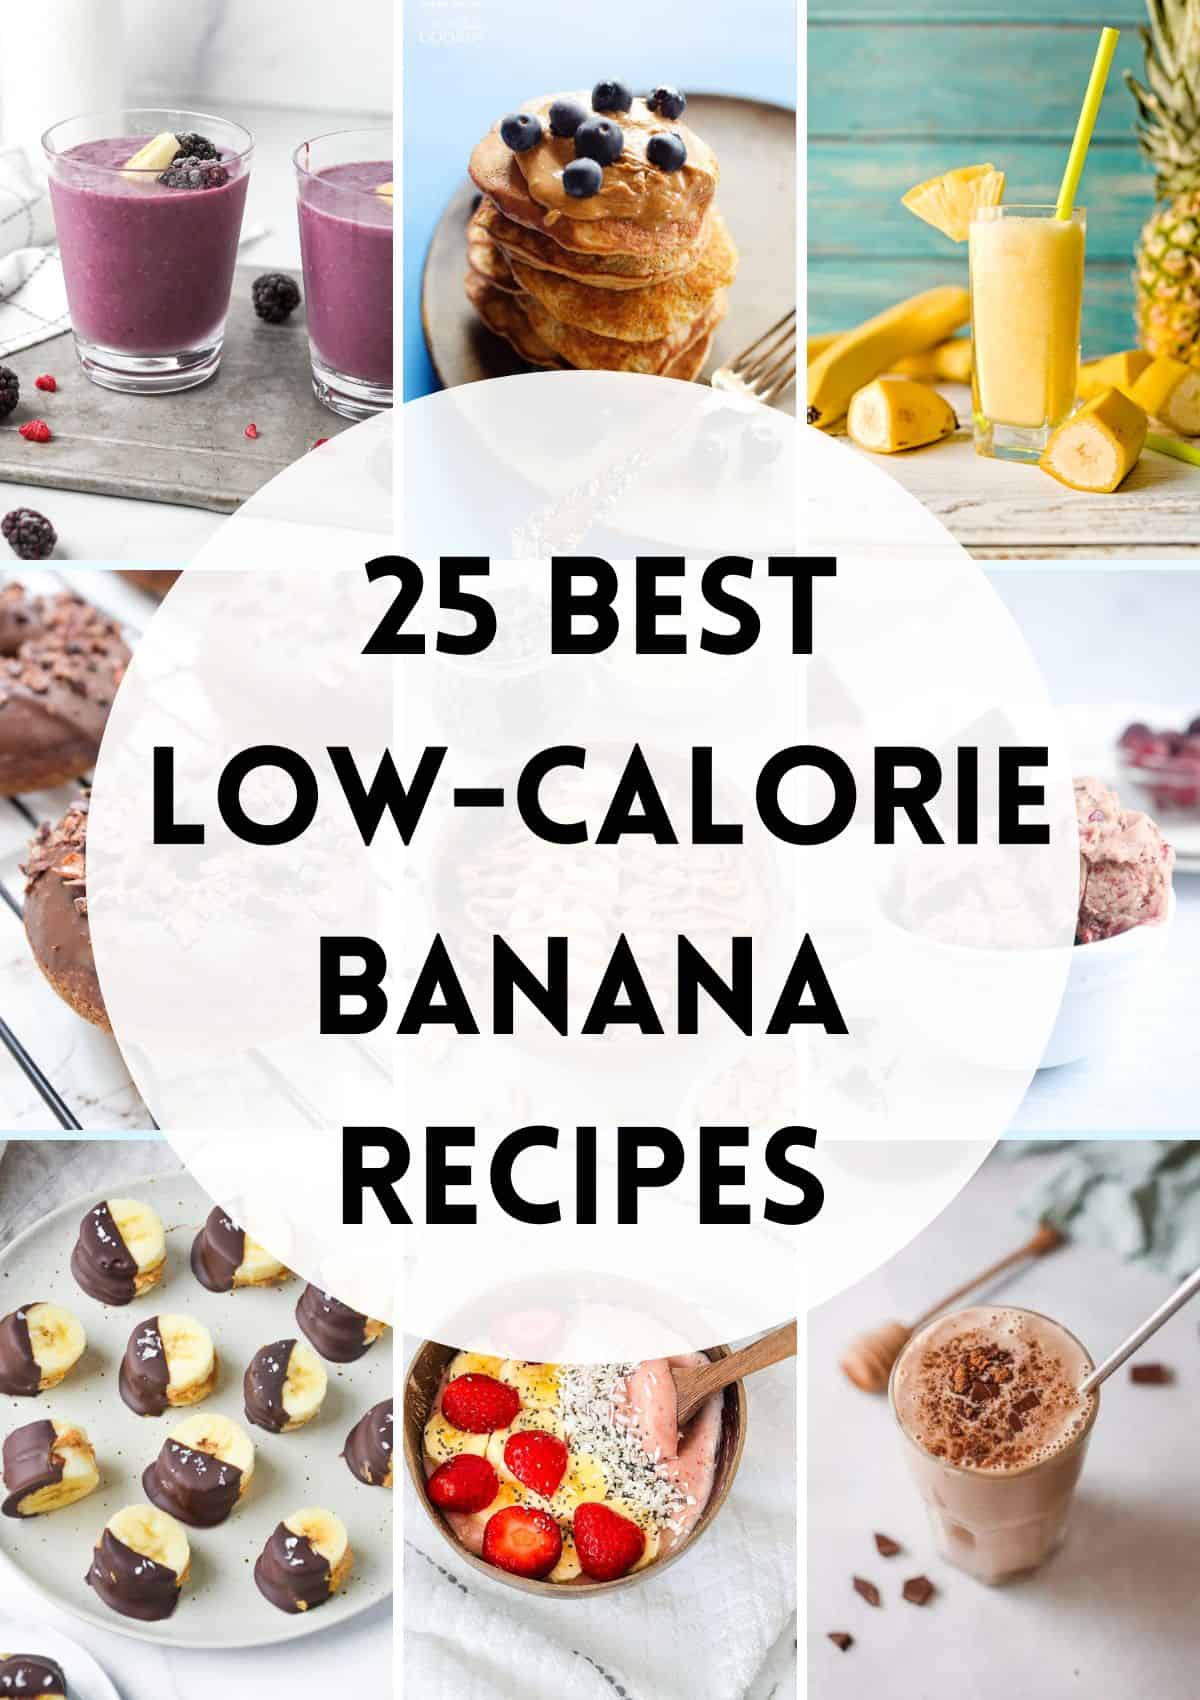 A collage of 9 banana recipe images with a round white circle in the middle with caption "27 best low-calorie banana recipes".